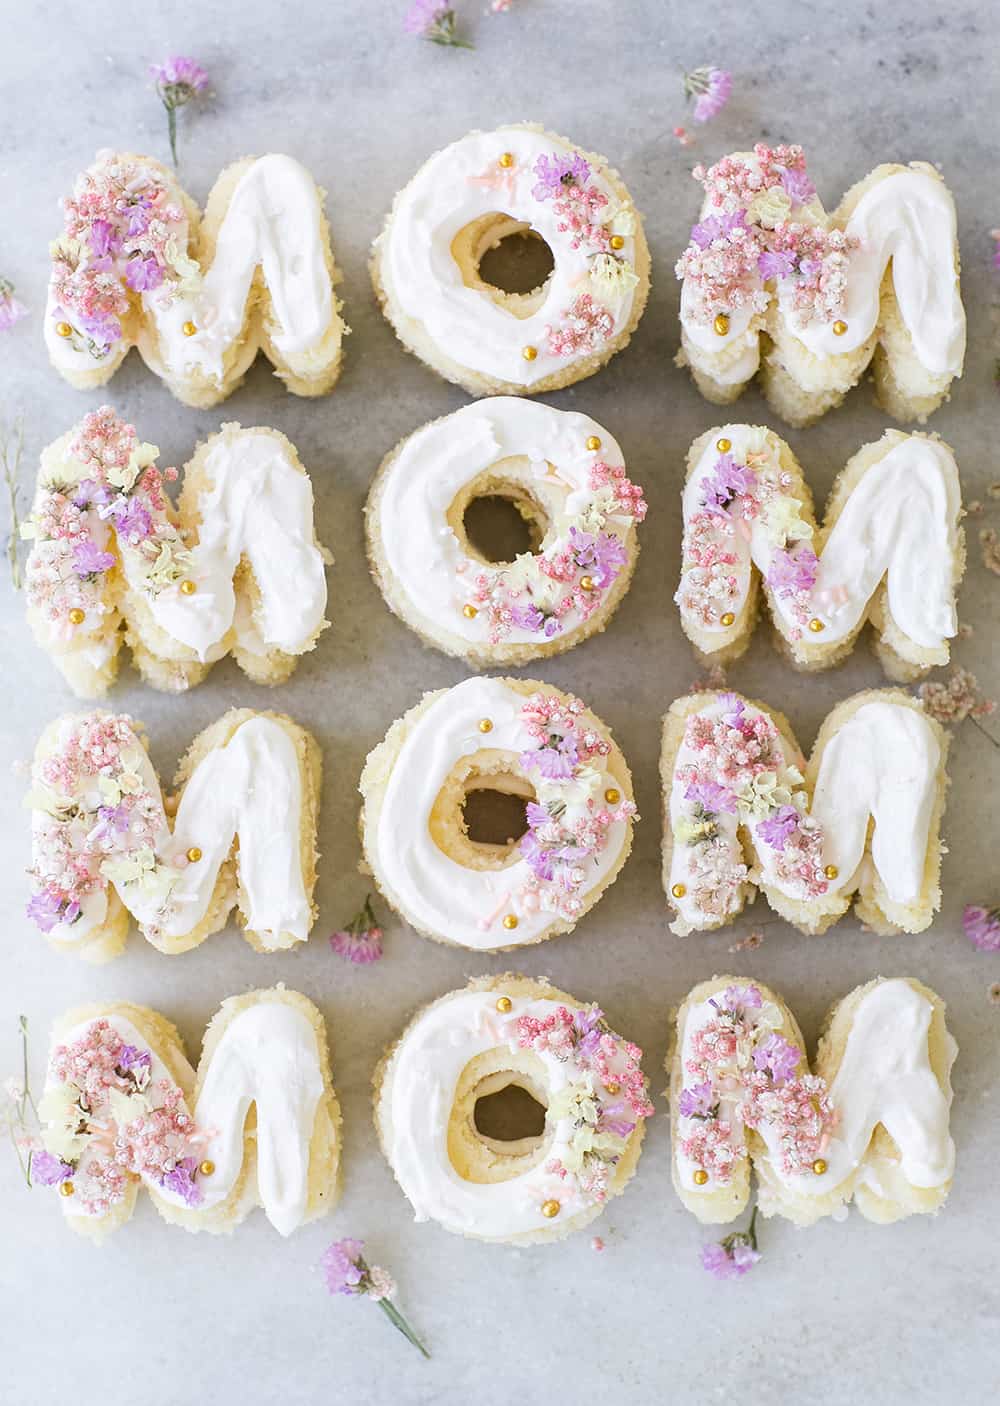 Mini Mother's Day Cakes that spell mom on a marble table with flowers and sprinkles.